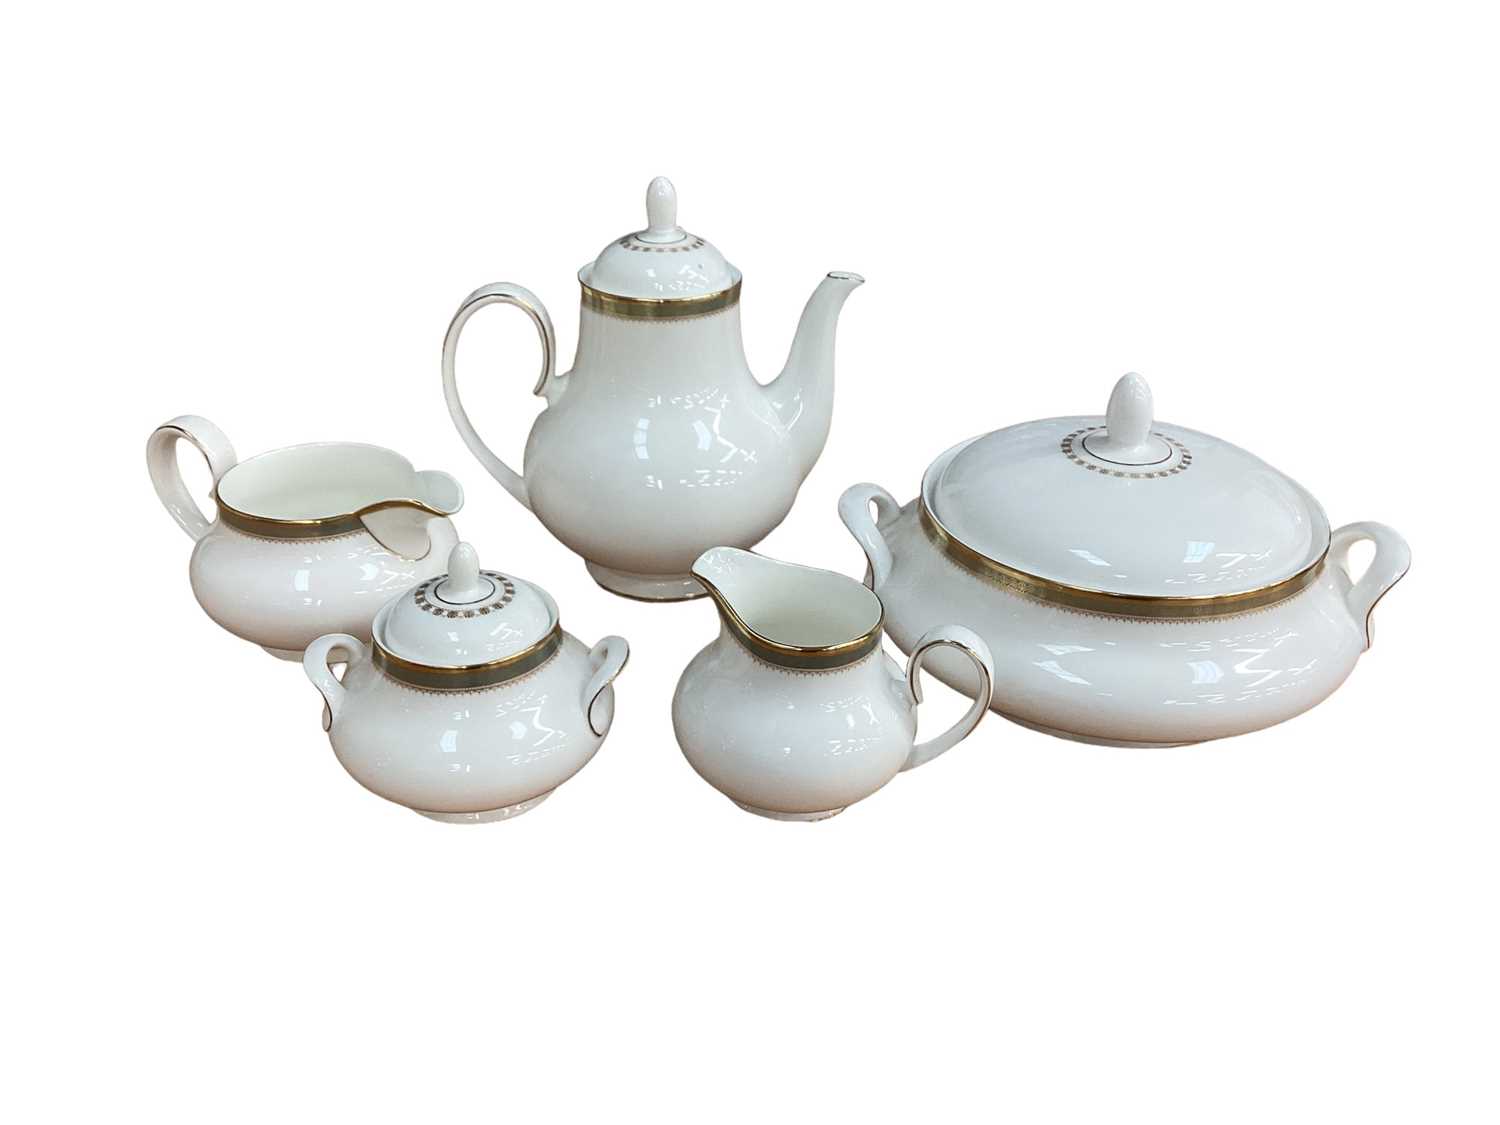 Royal Doulton Clarendon Pattern dinner/tea and coffee service - 57 pieces